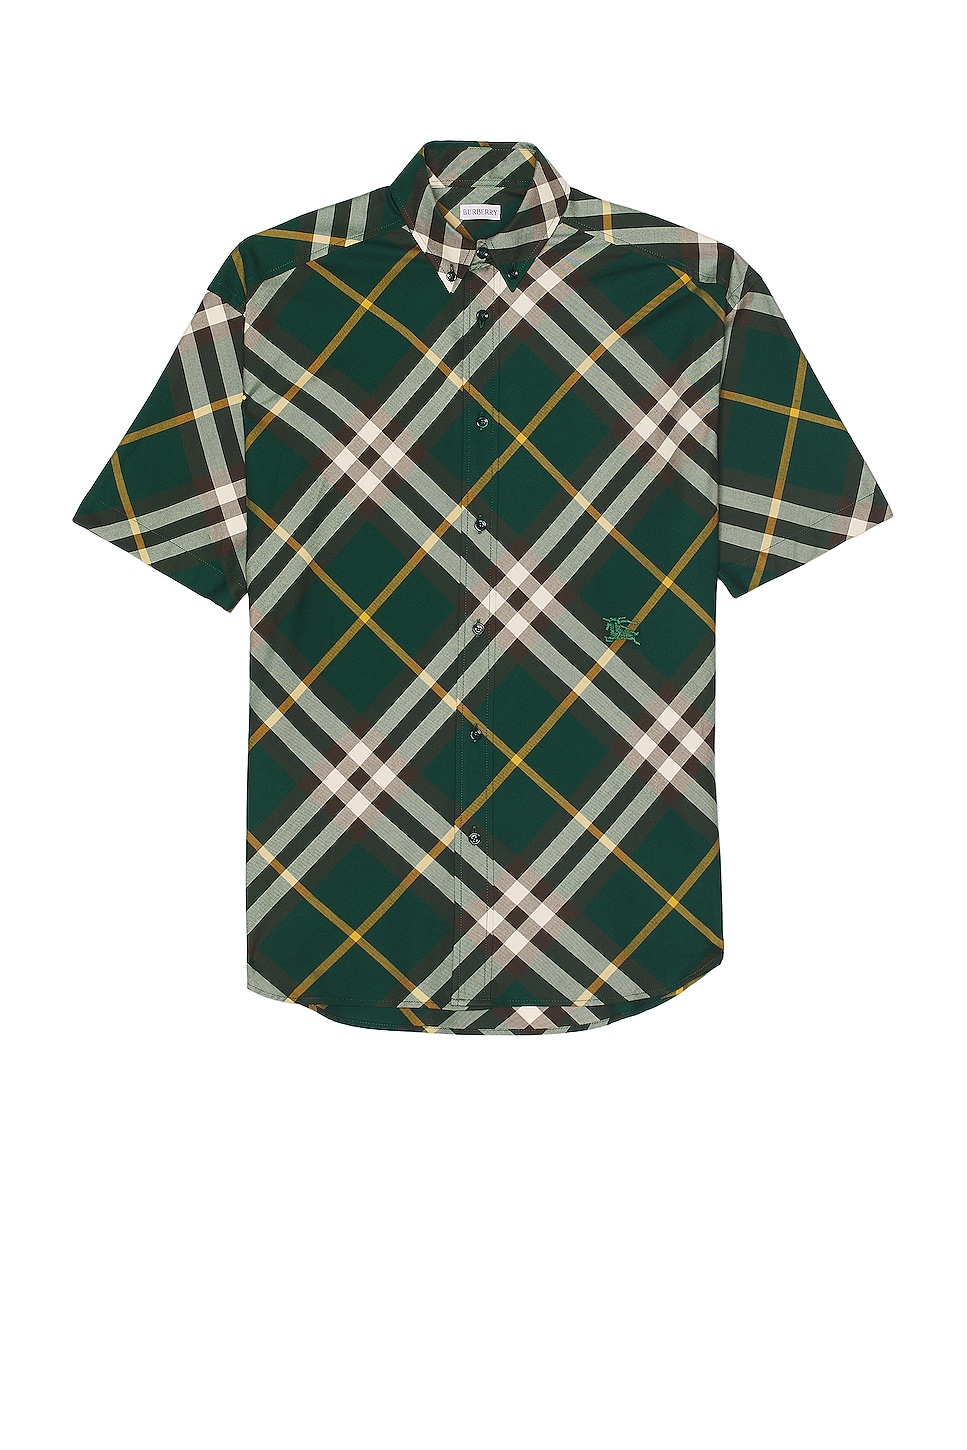 Image 1 of Burberry Short Sleeve Check Pattern Shirt in Ivy Ip Check